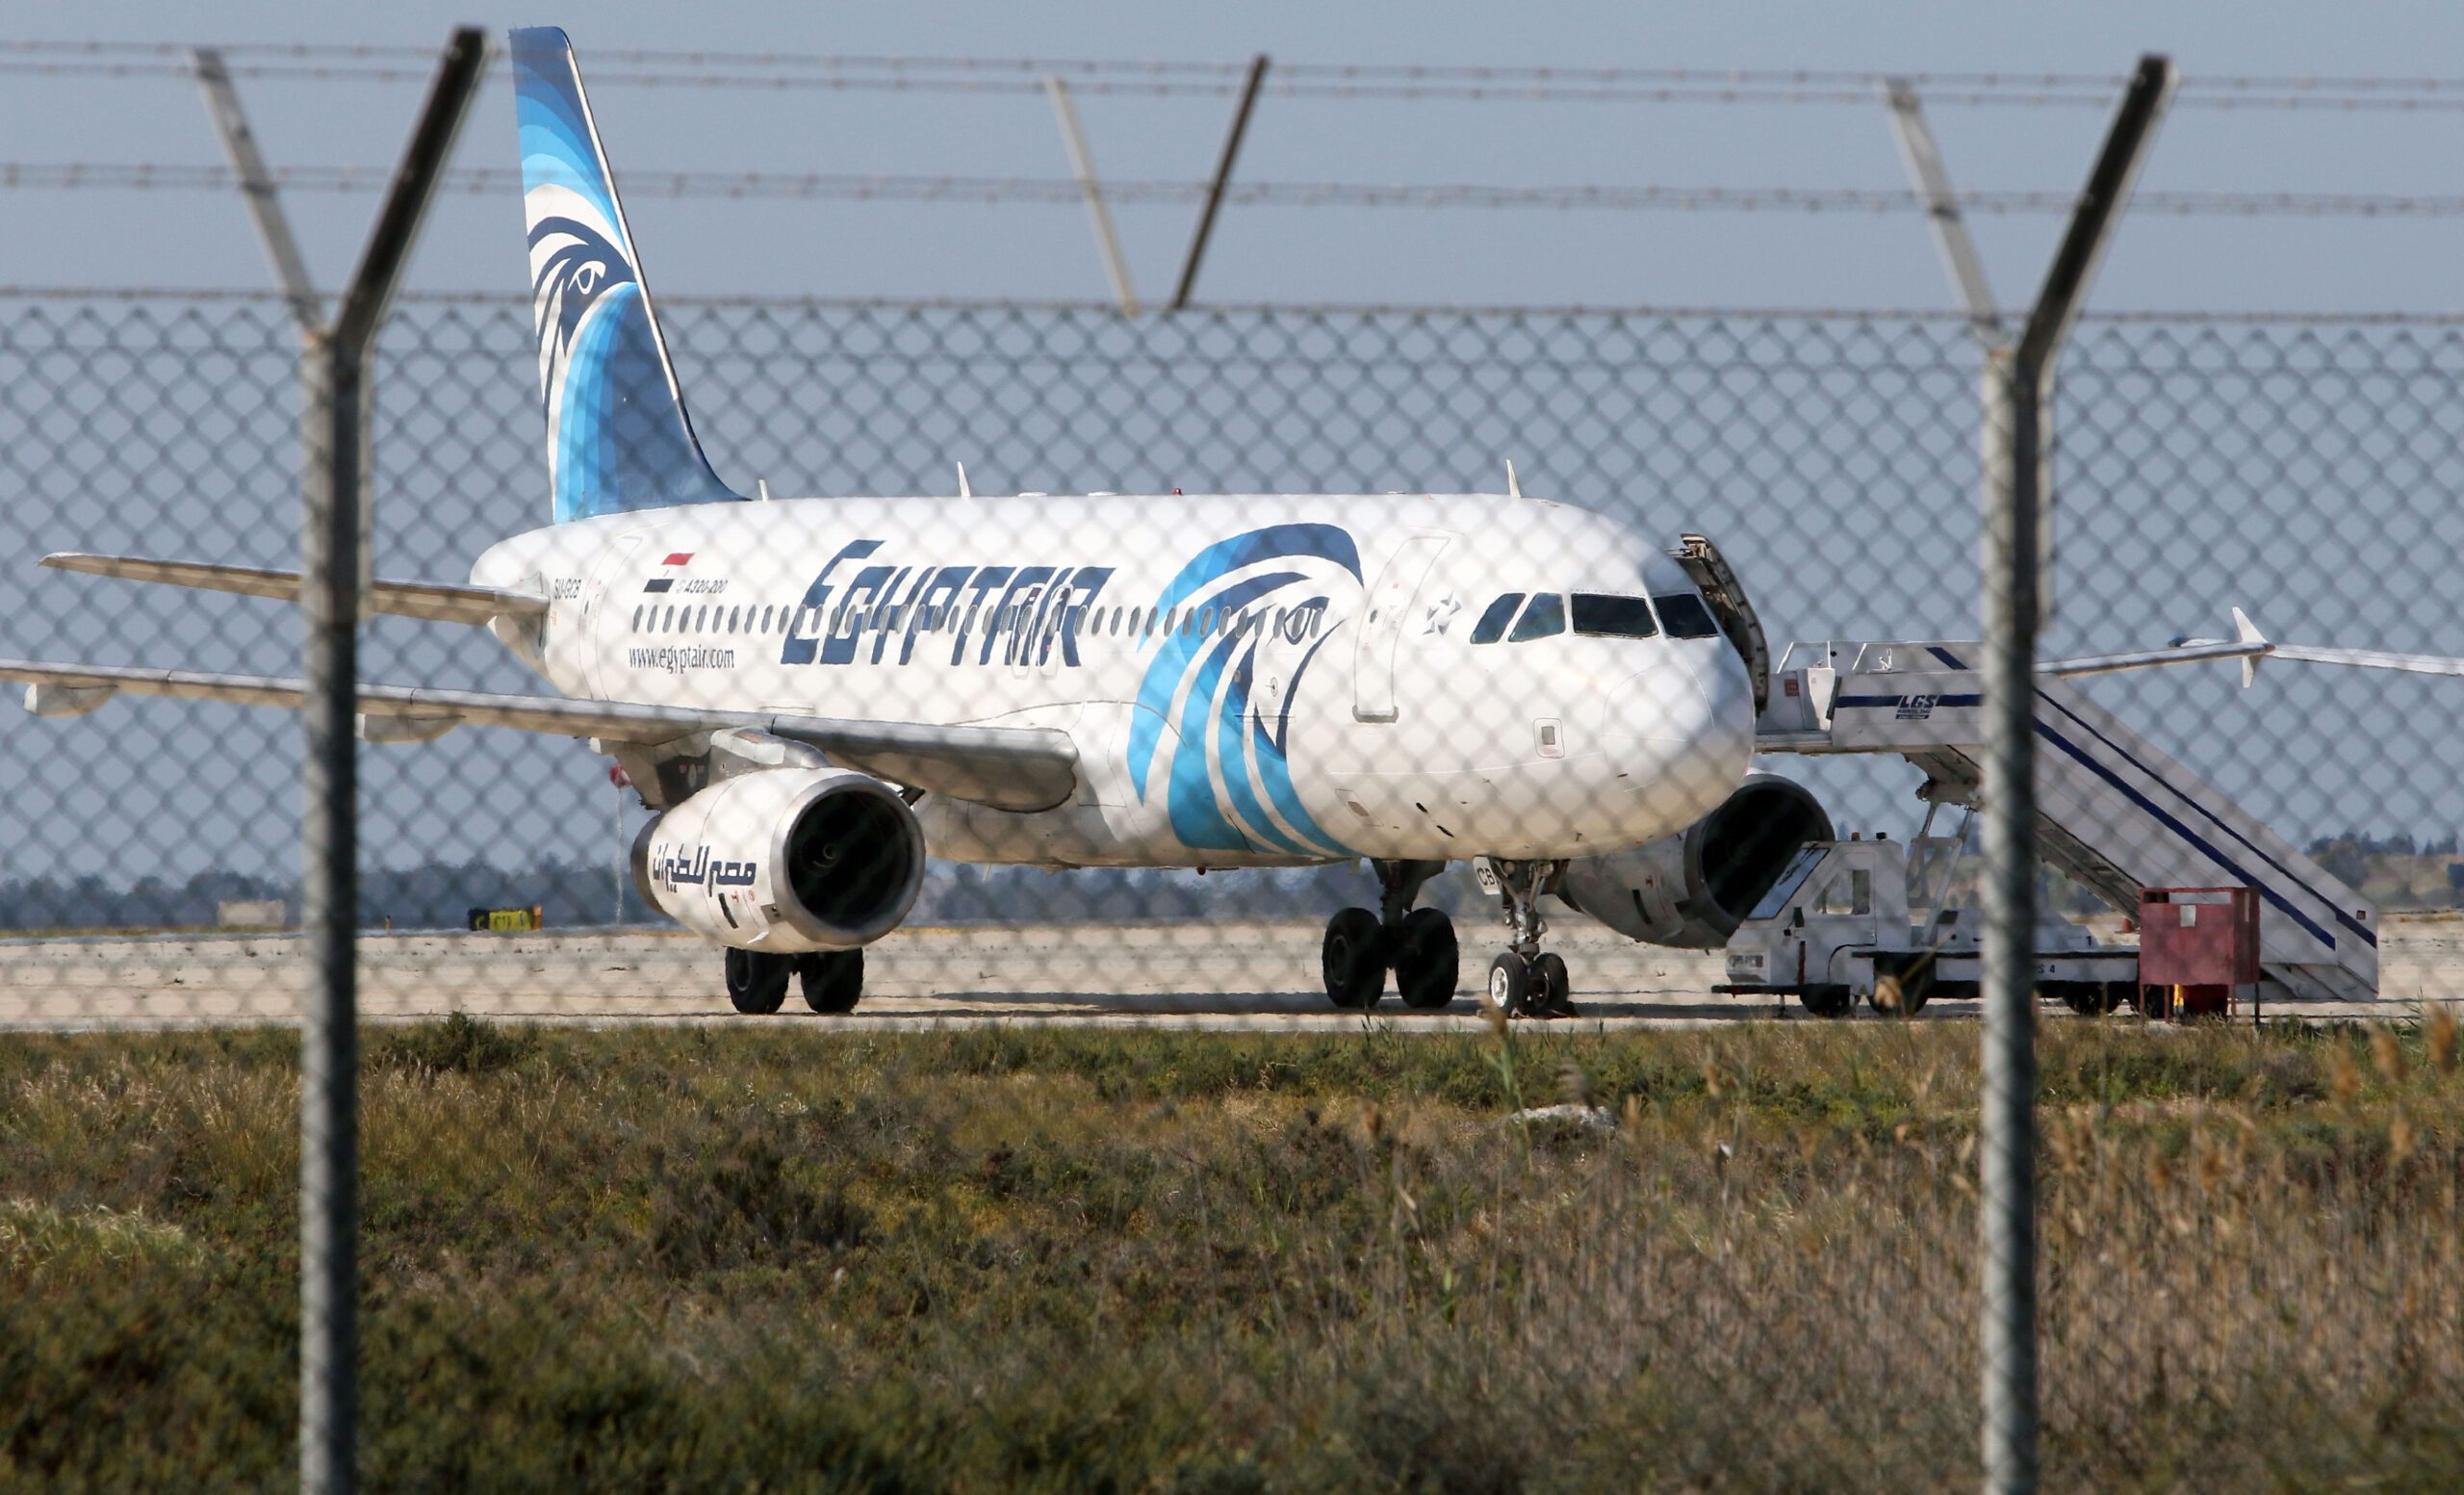 Hijacker of EgyptAir flight arrested as Cyprus airport drama ends